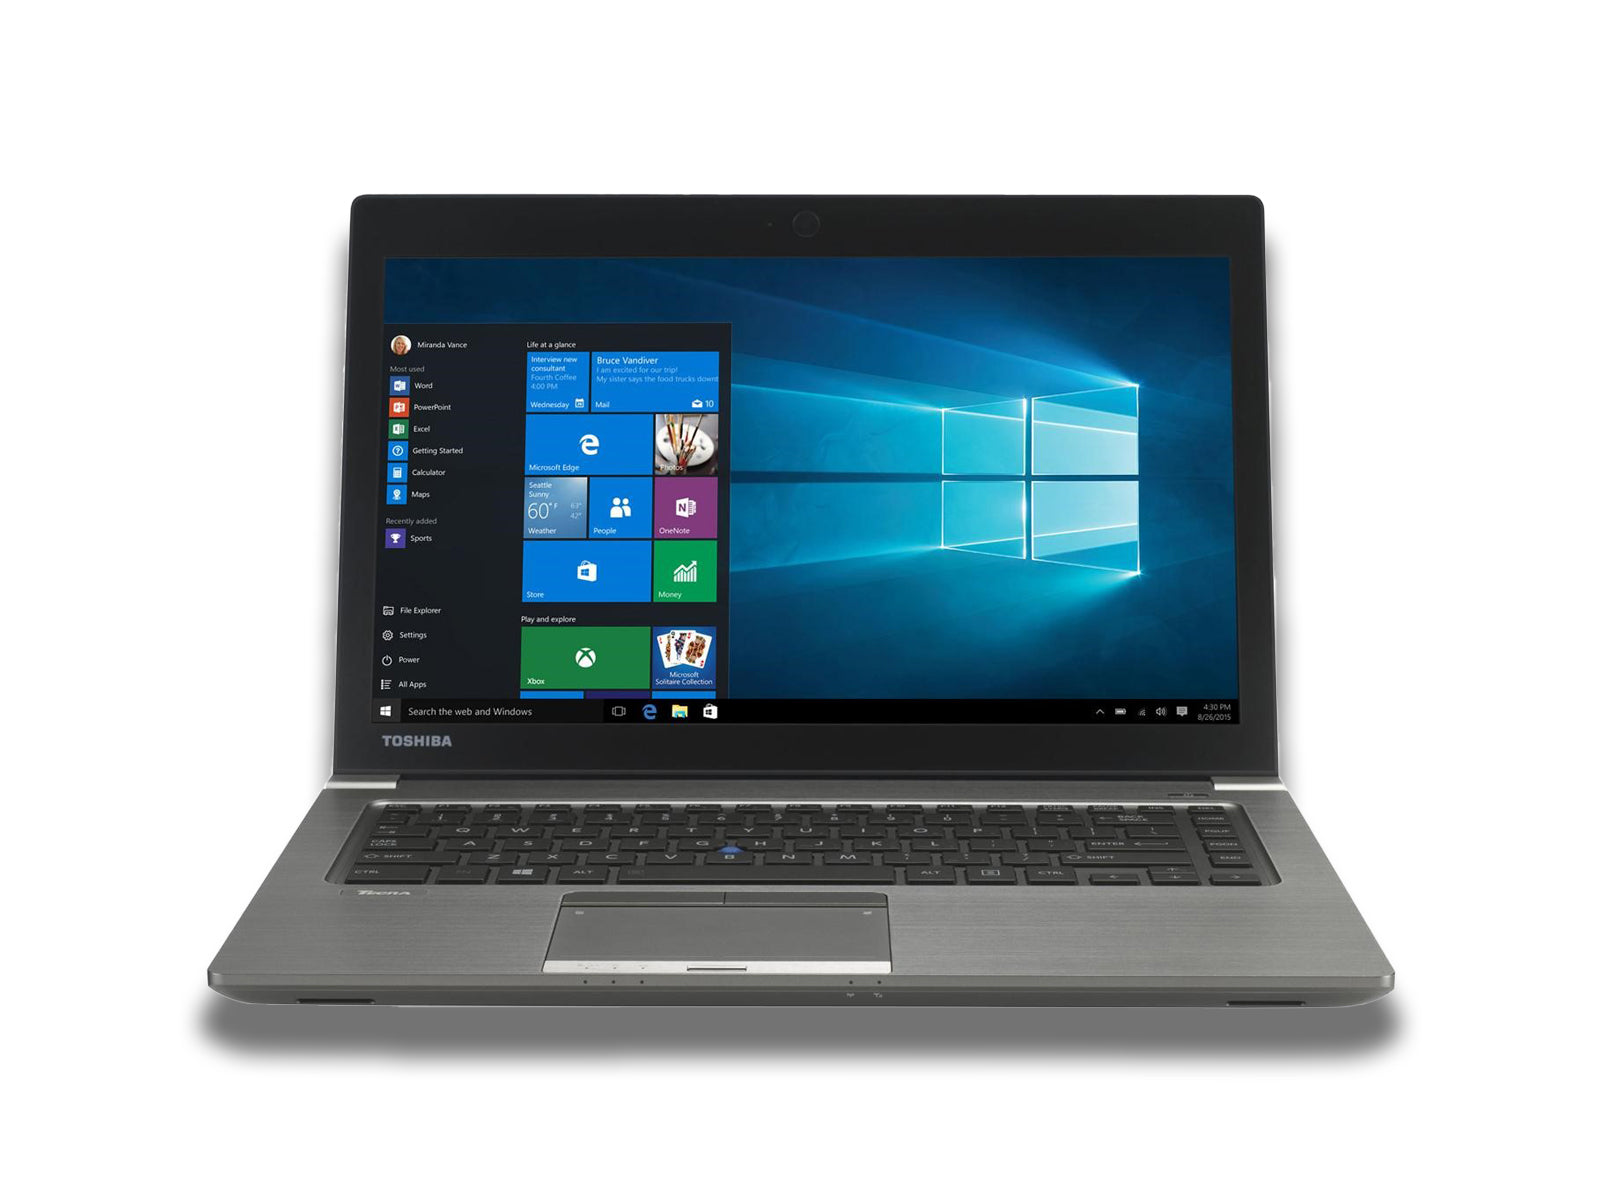 front-image-of-the-toshiba-tecra-laptop-on-the-white-background